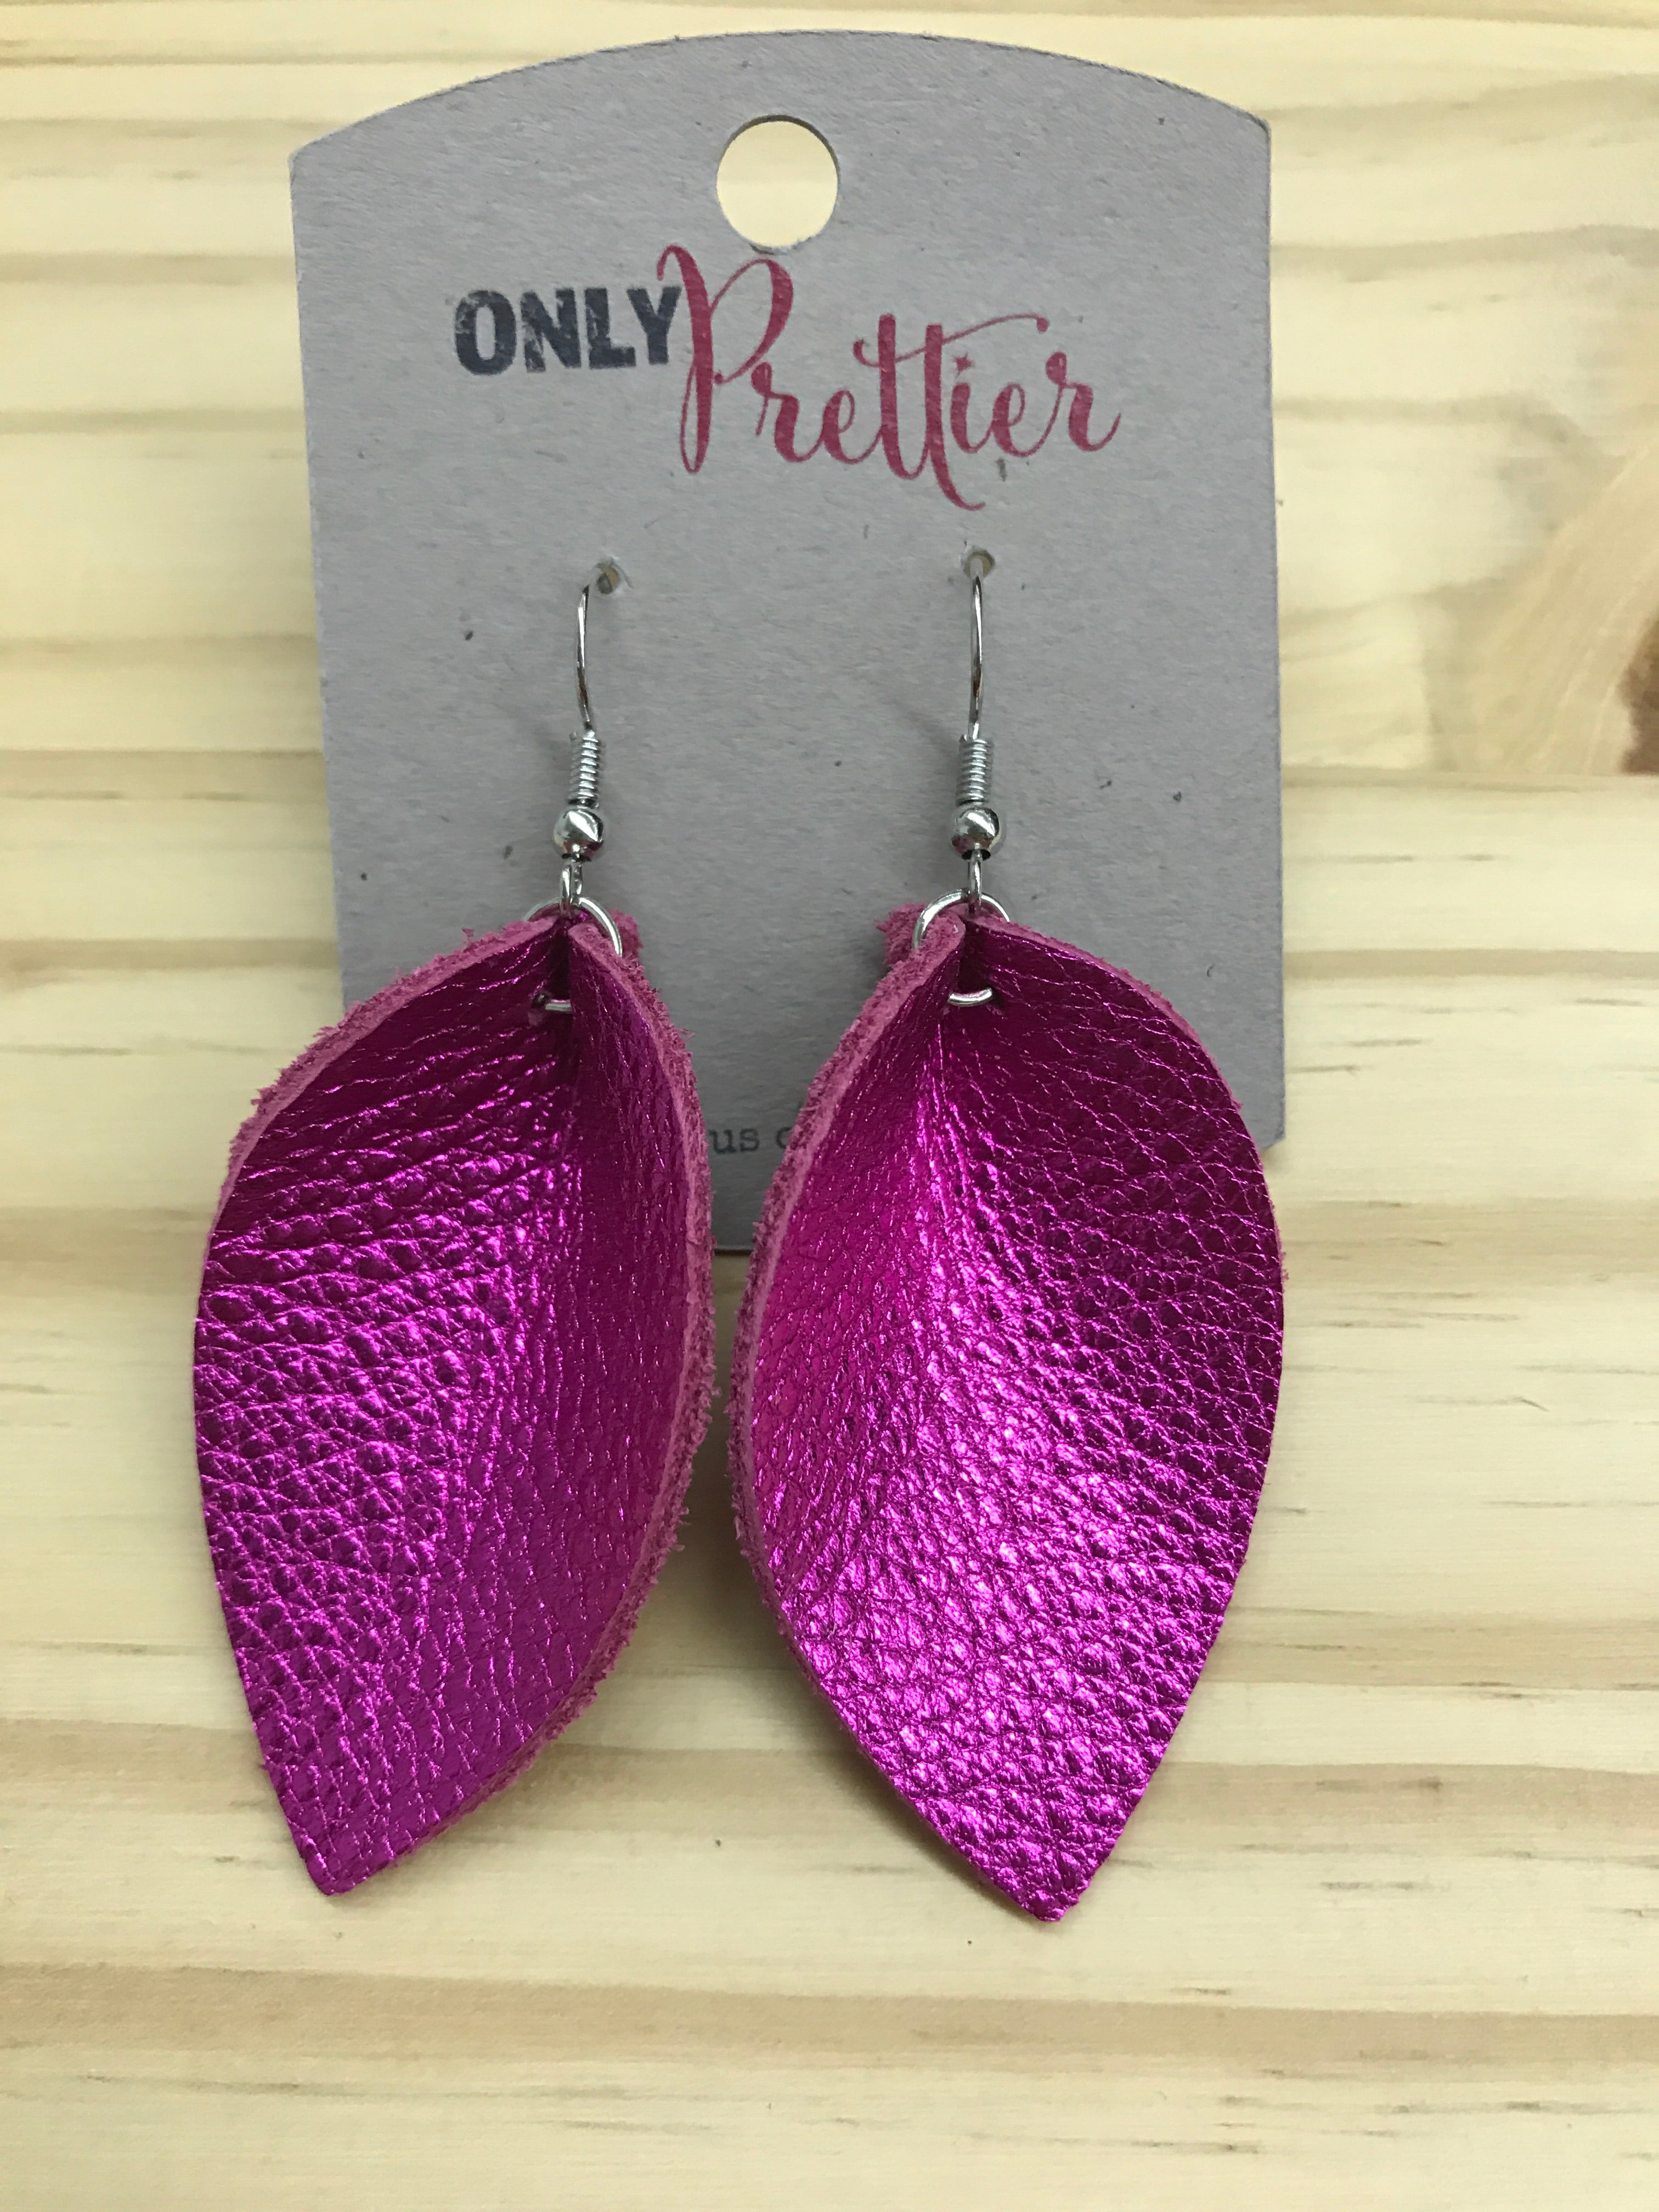 Hot Pink Leather Earrings